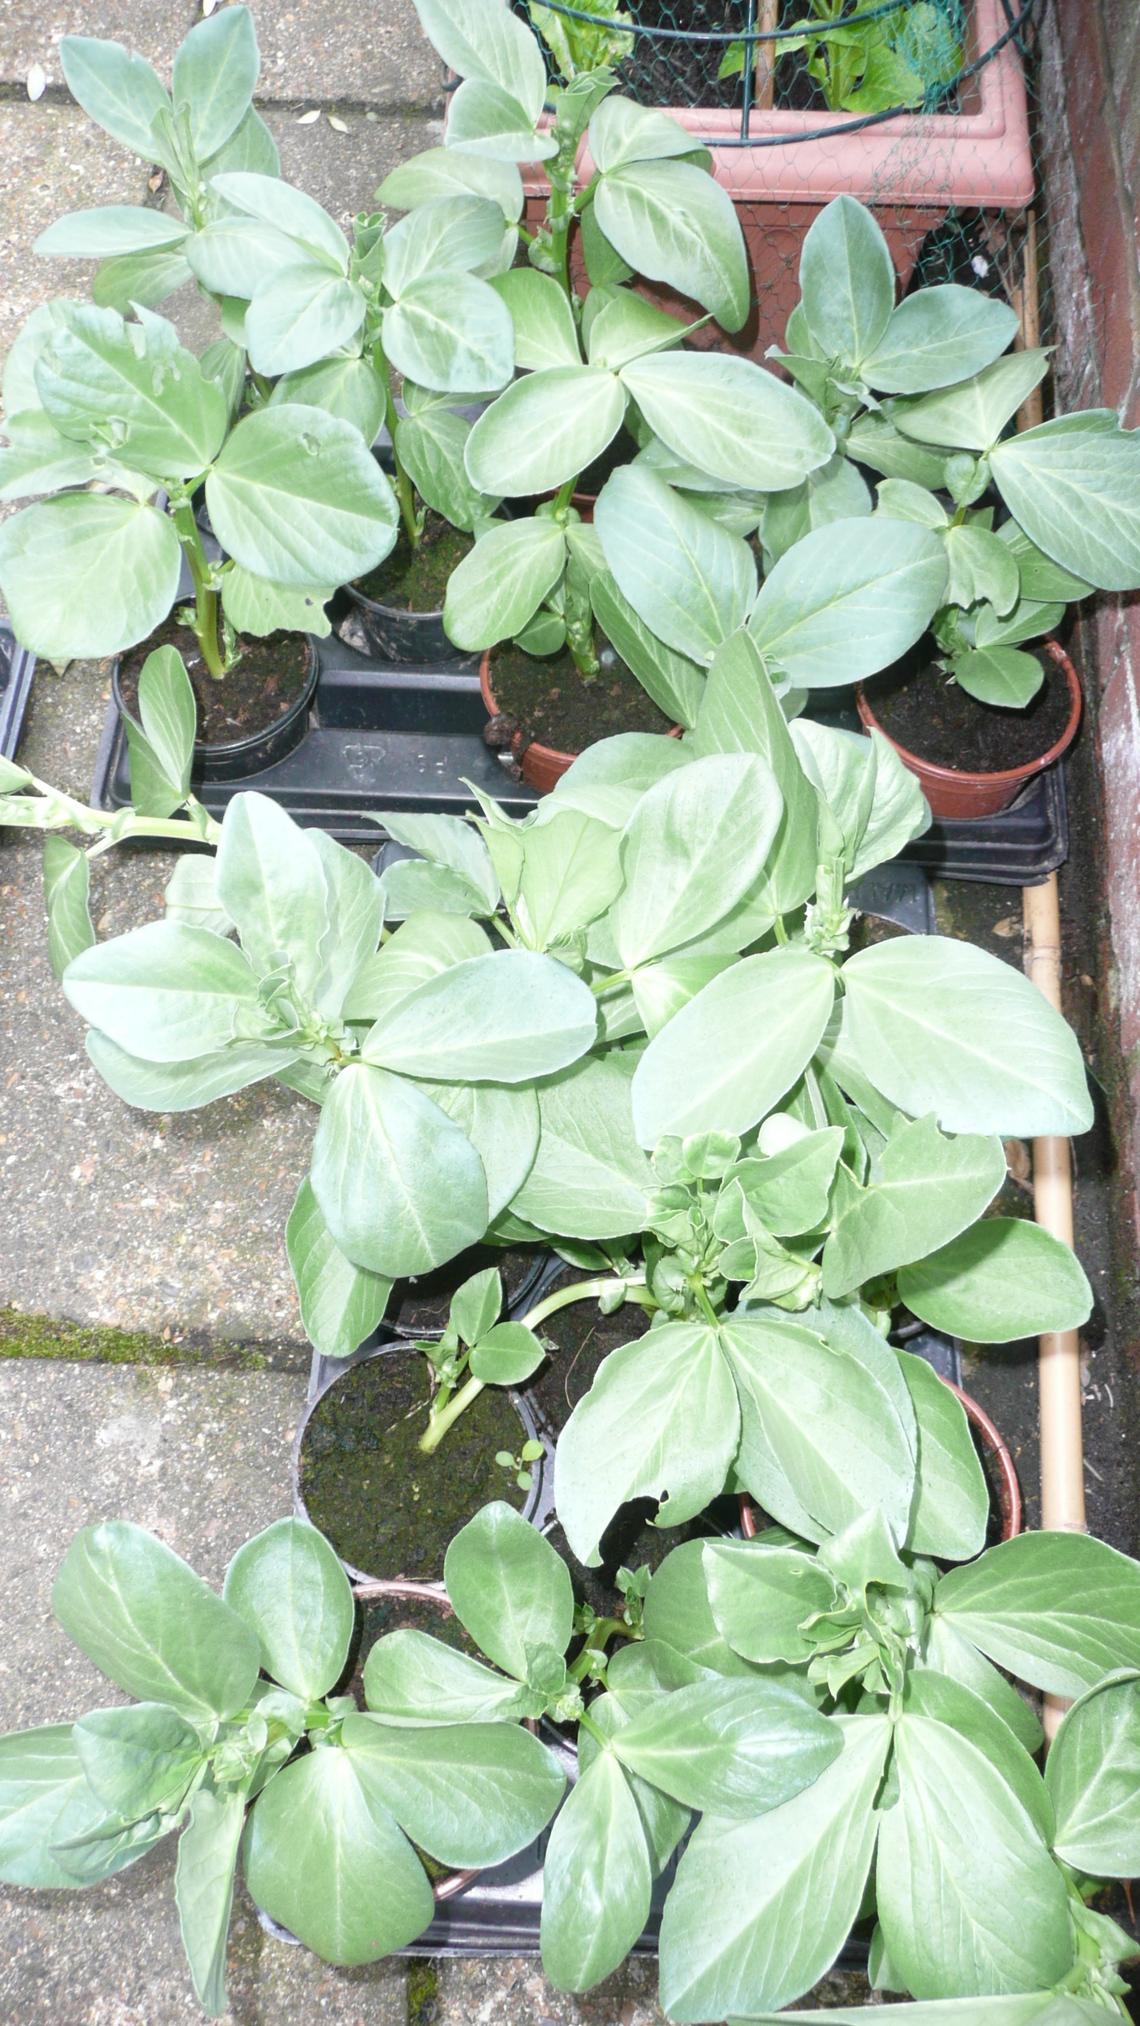 broad beans ready to plant out